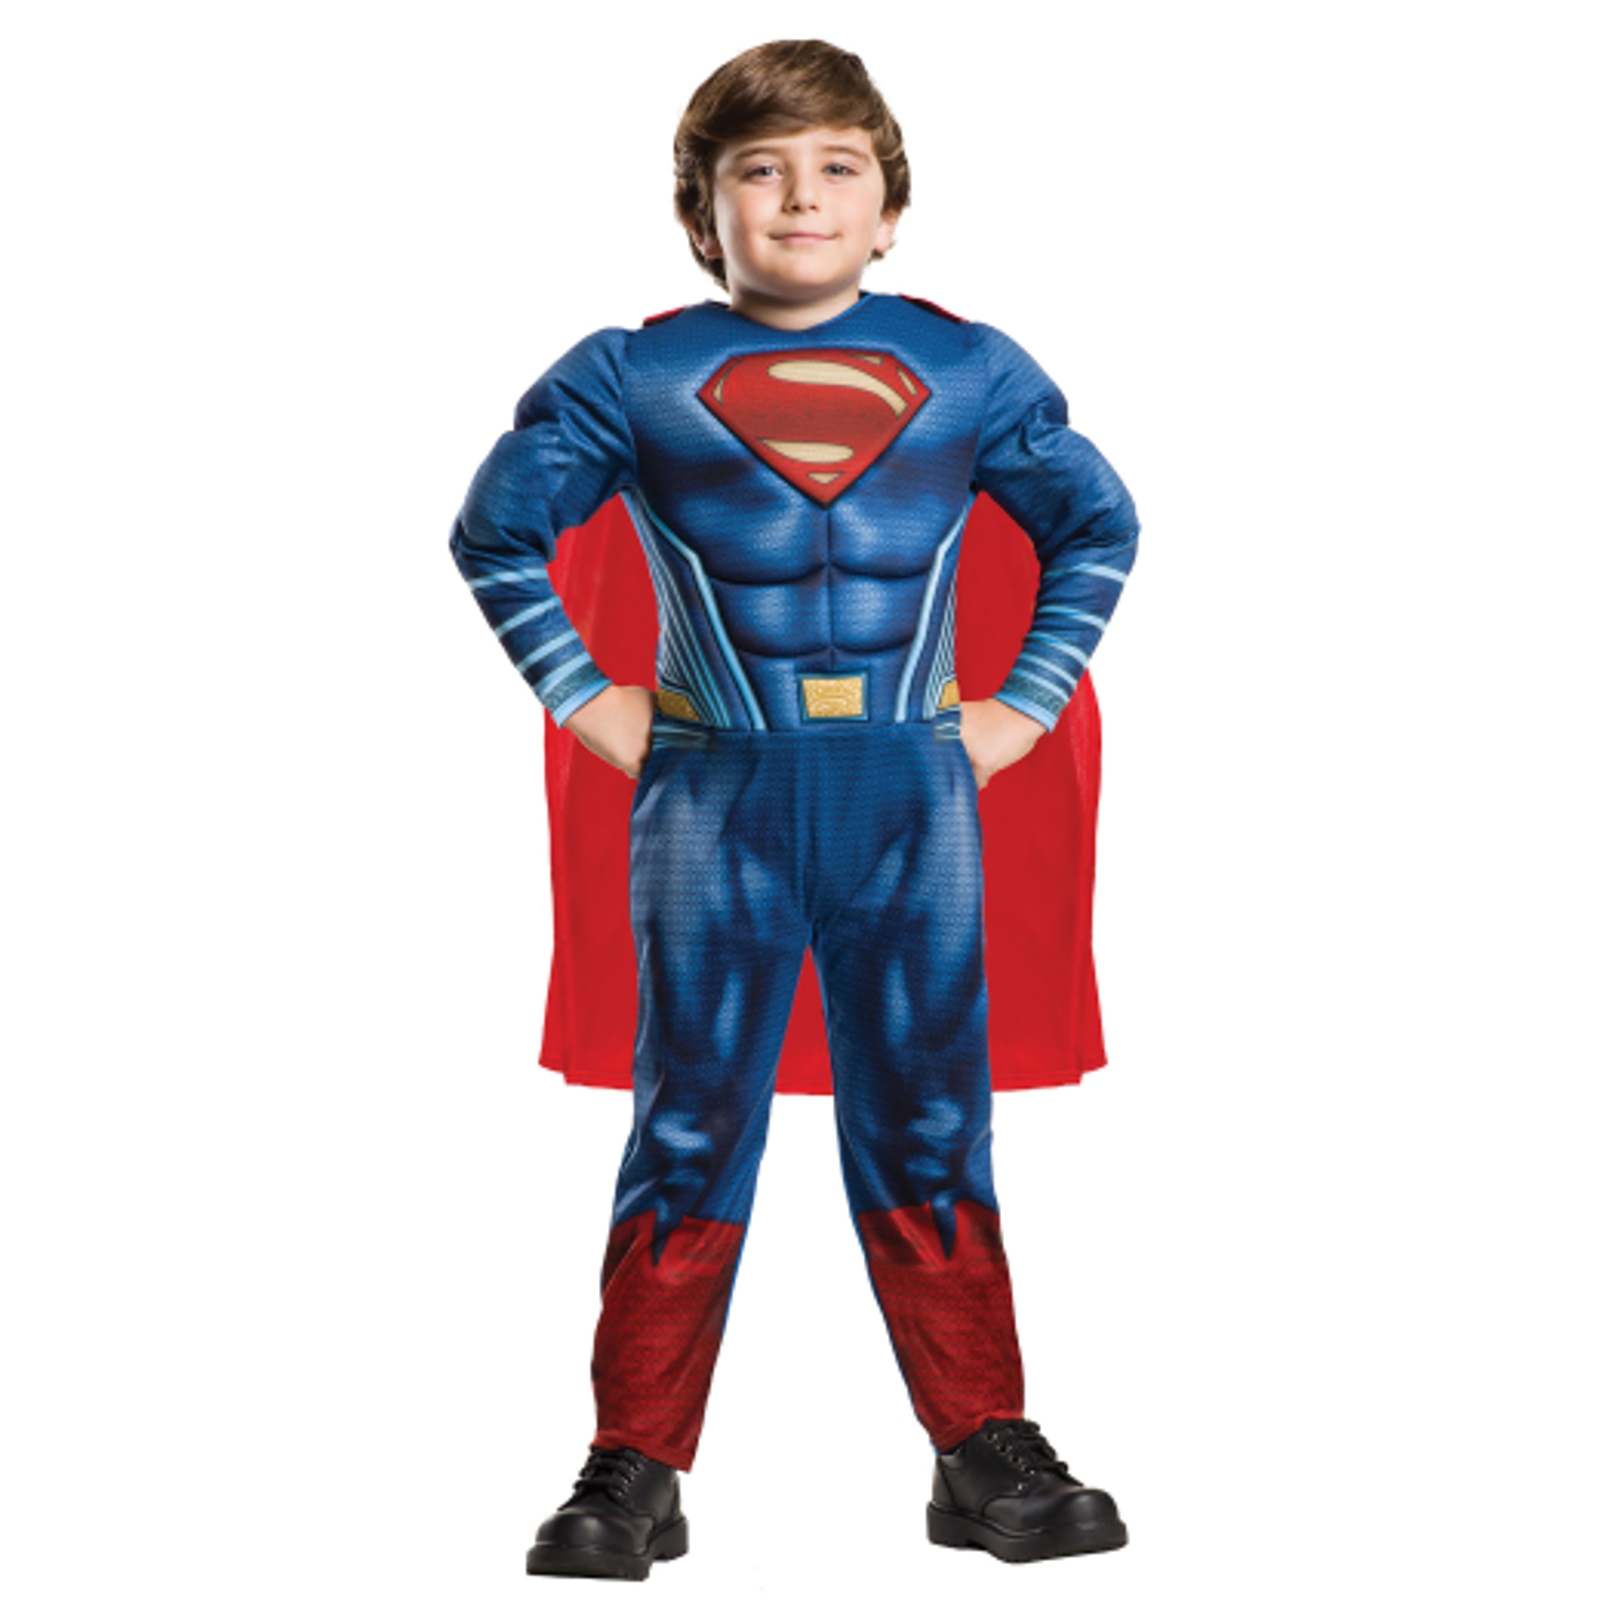 Superman Deluxe Childs Costume: Age 3-4 - Non Stop Party Shop